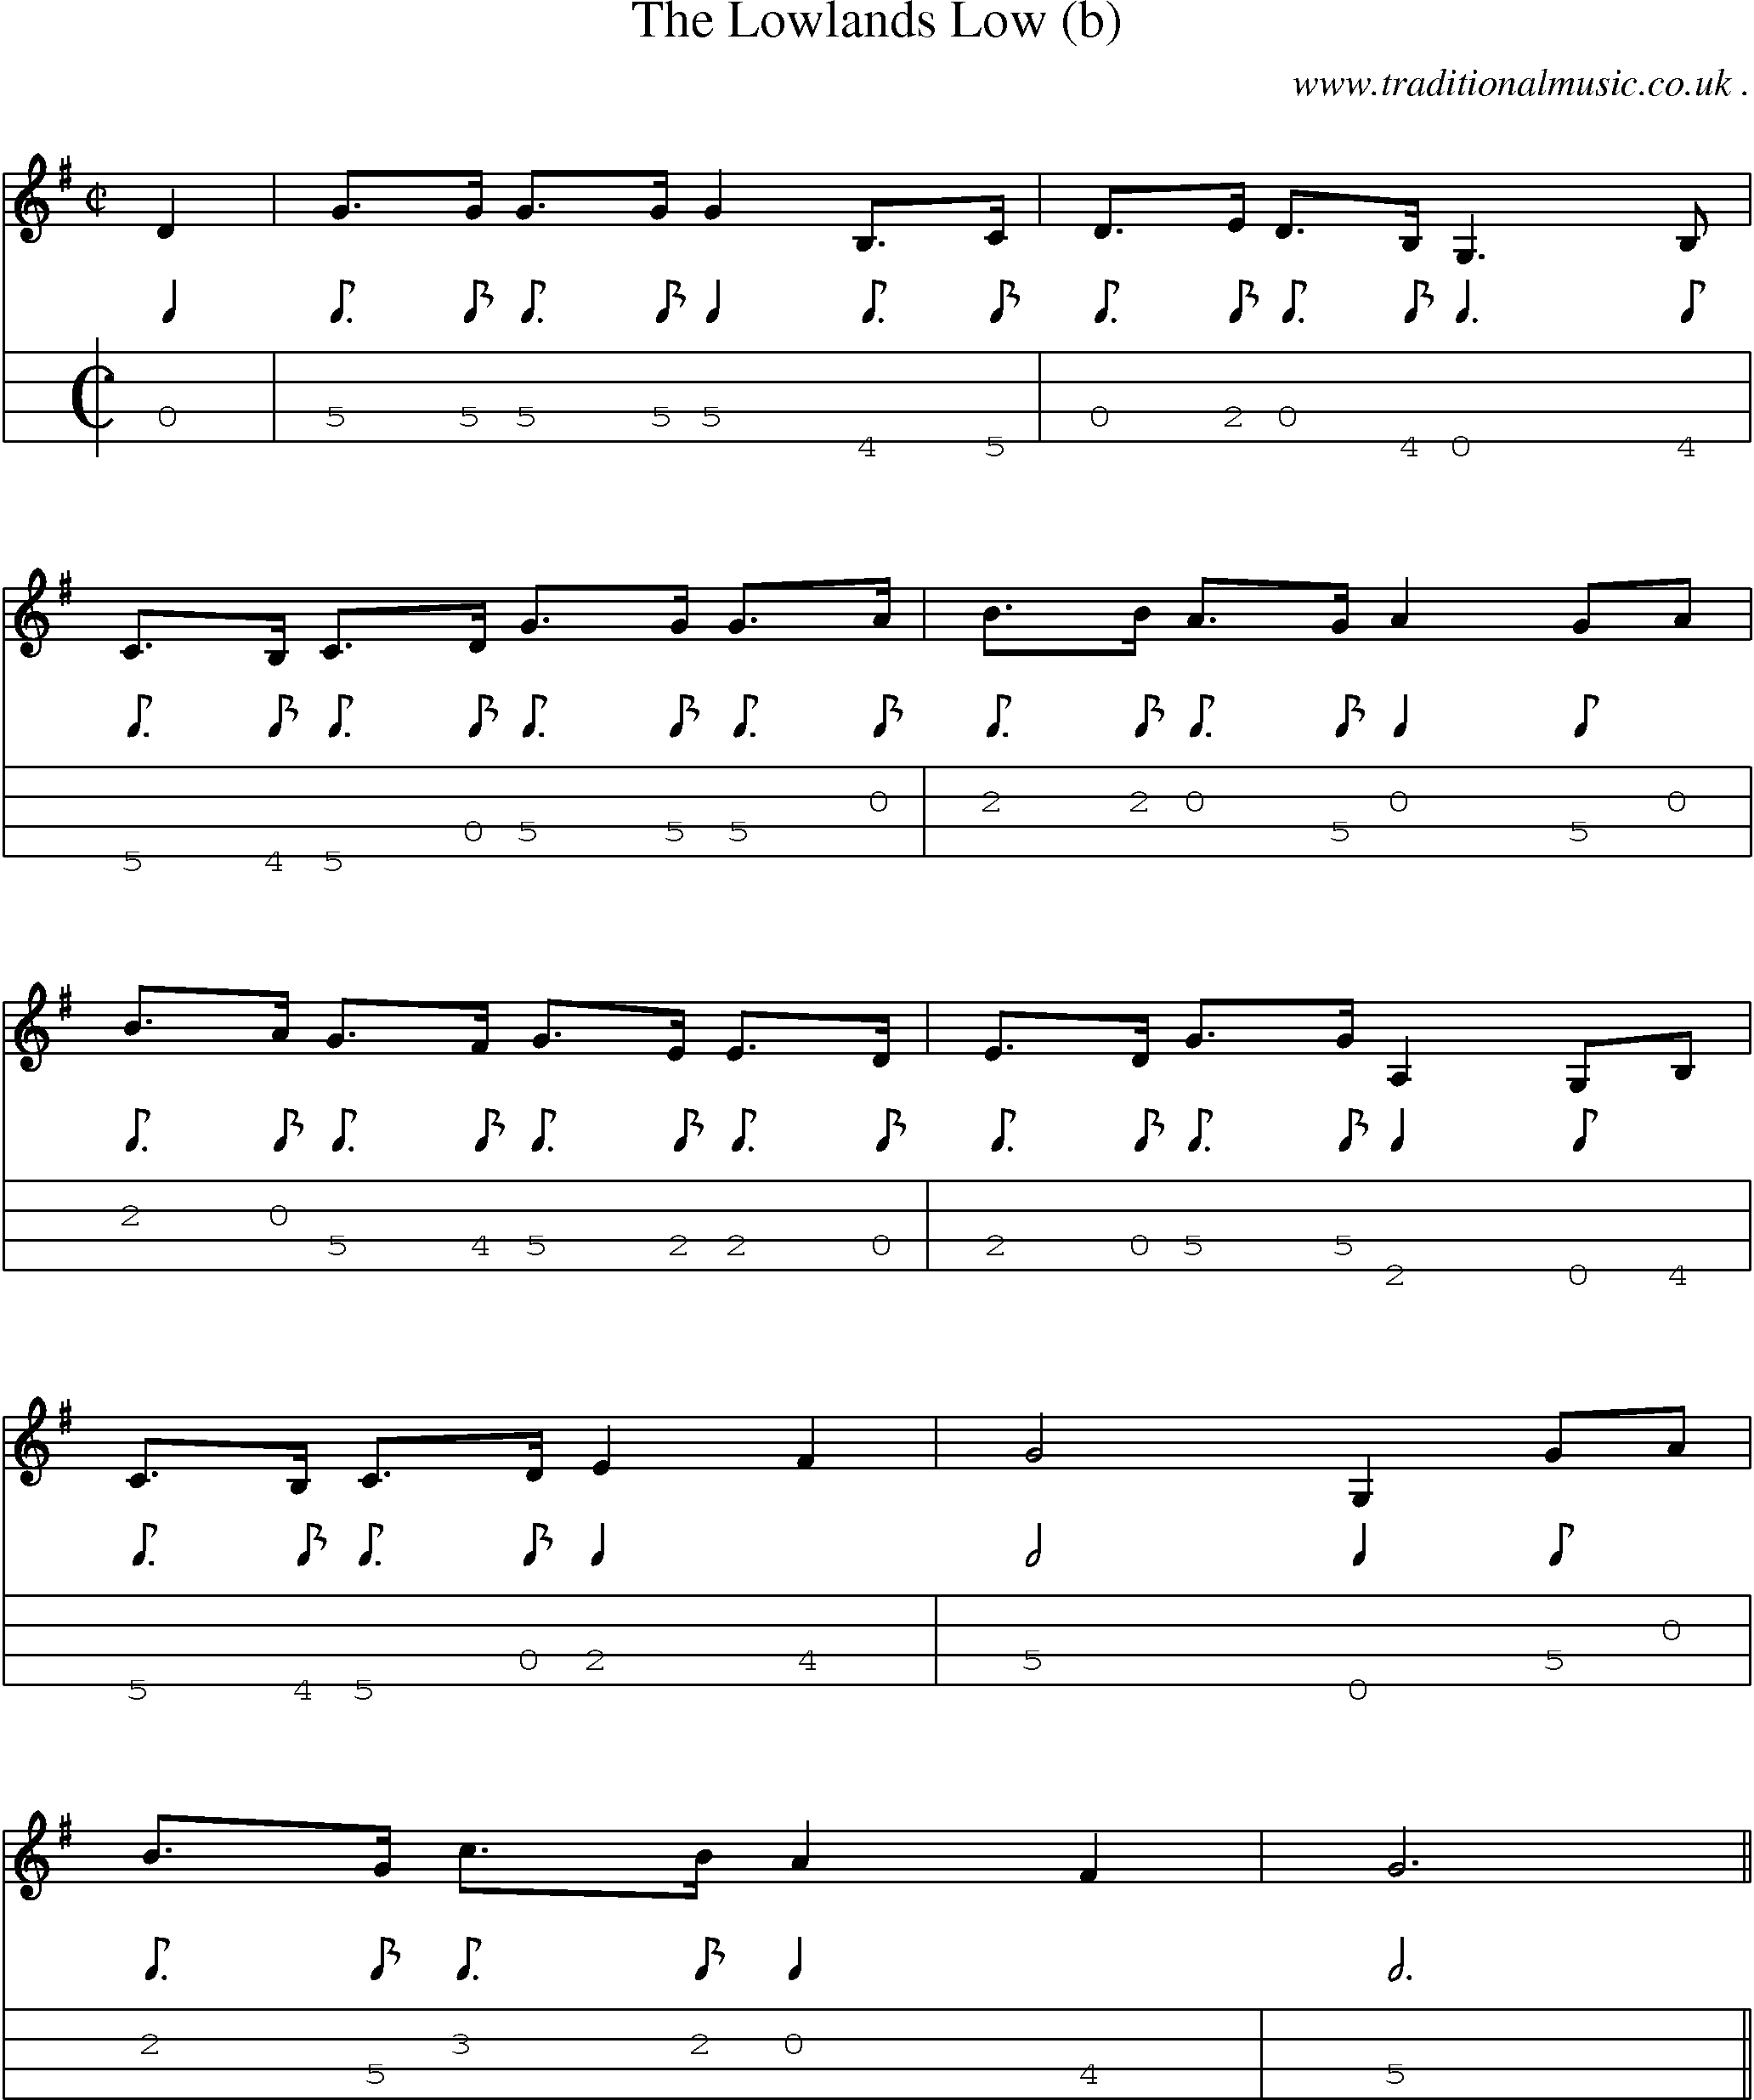 Sheet-Music and Mandolin Tabs for The Lowlands Low (b)